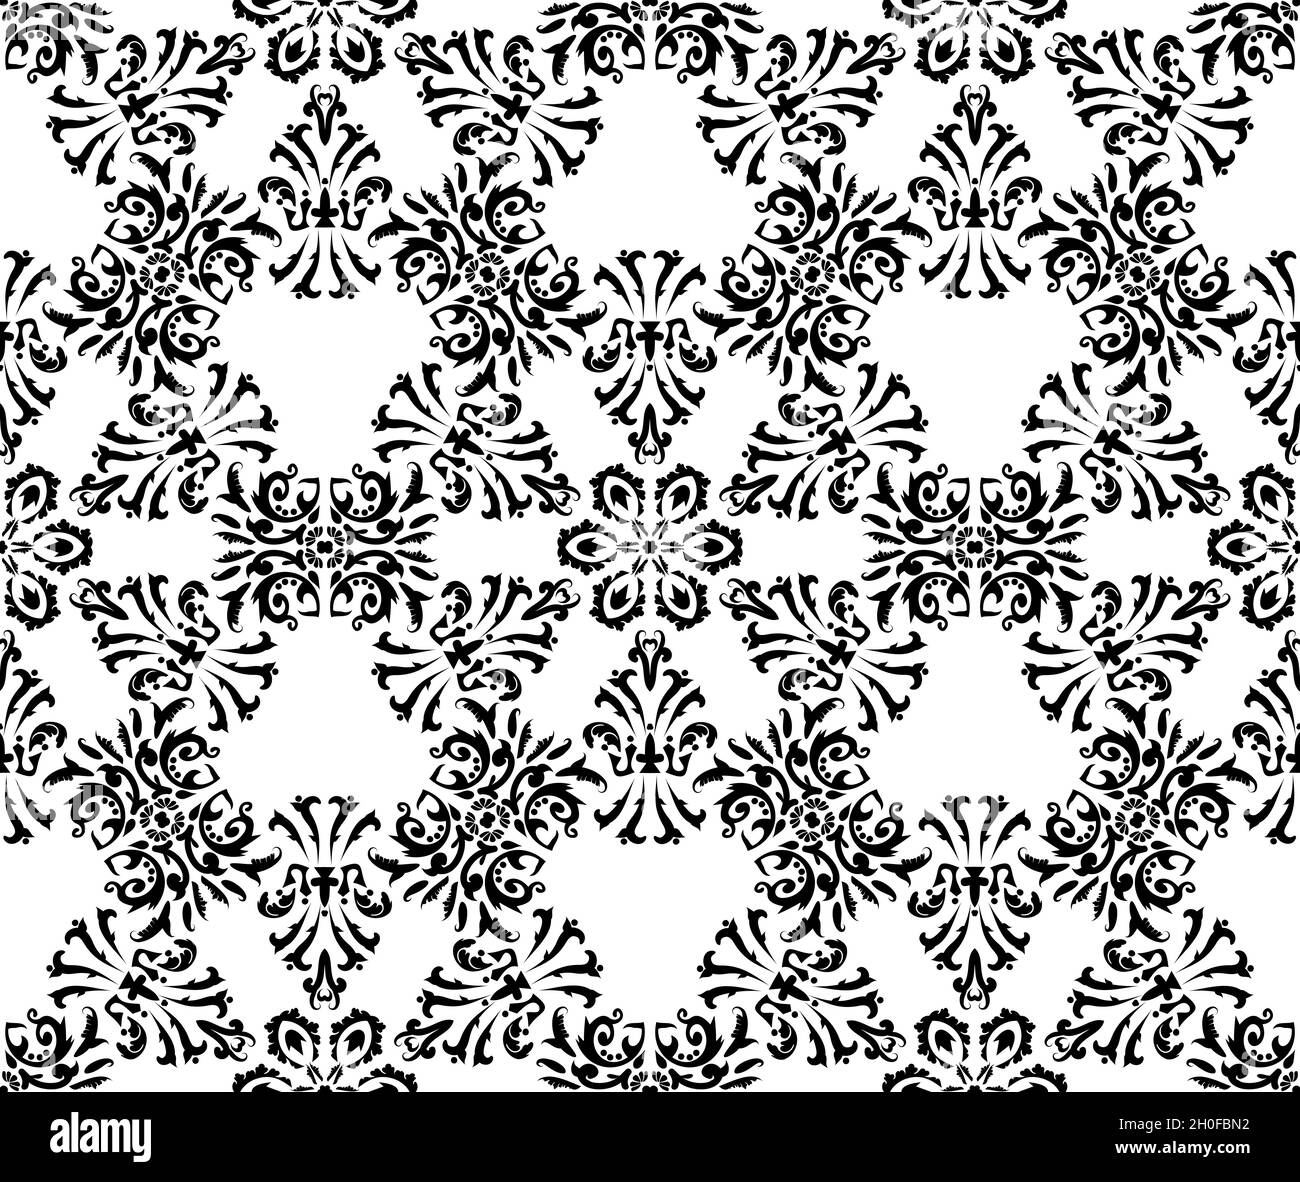 Damask black-white floral pattern. Vintage rich victorian seamless pattern. Decorative ornate texture. Black and white. For fabric, wallpaper Stock Vector